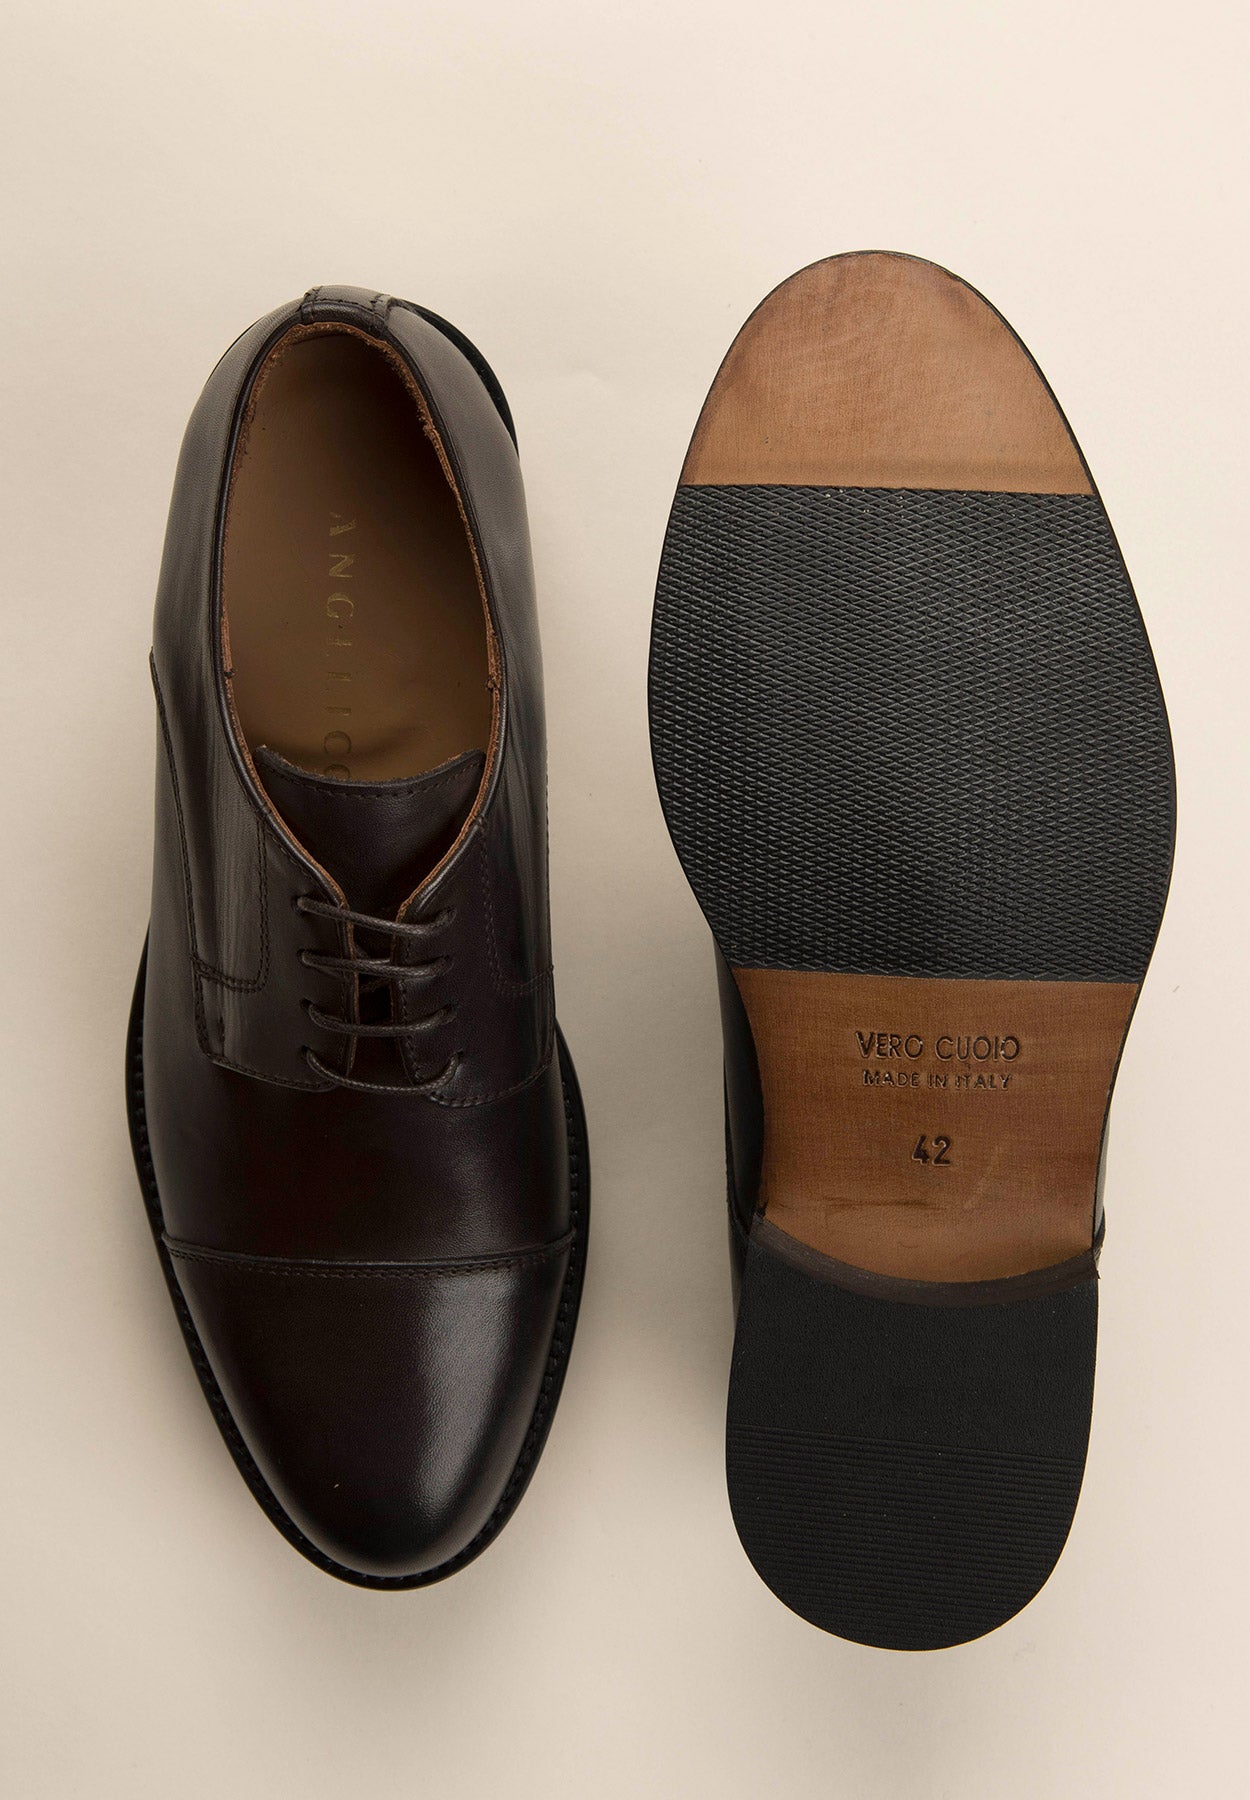 Dark Brown leather derby shoe with stitched toe cap